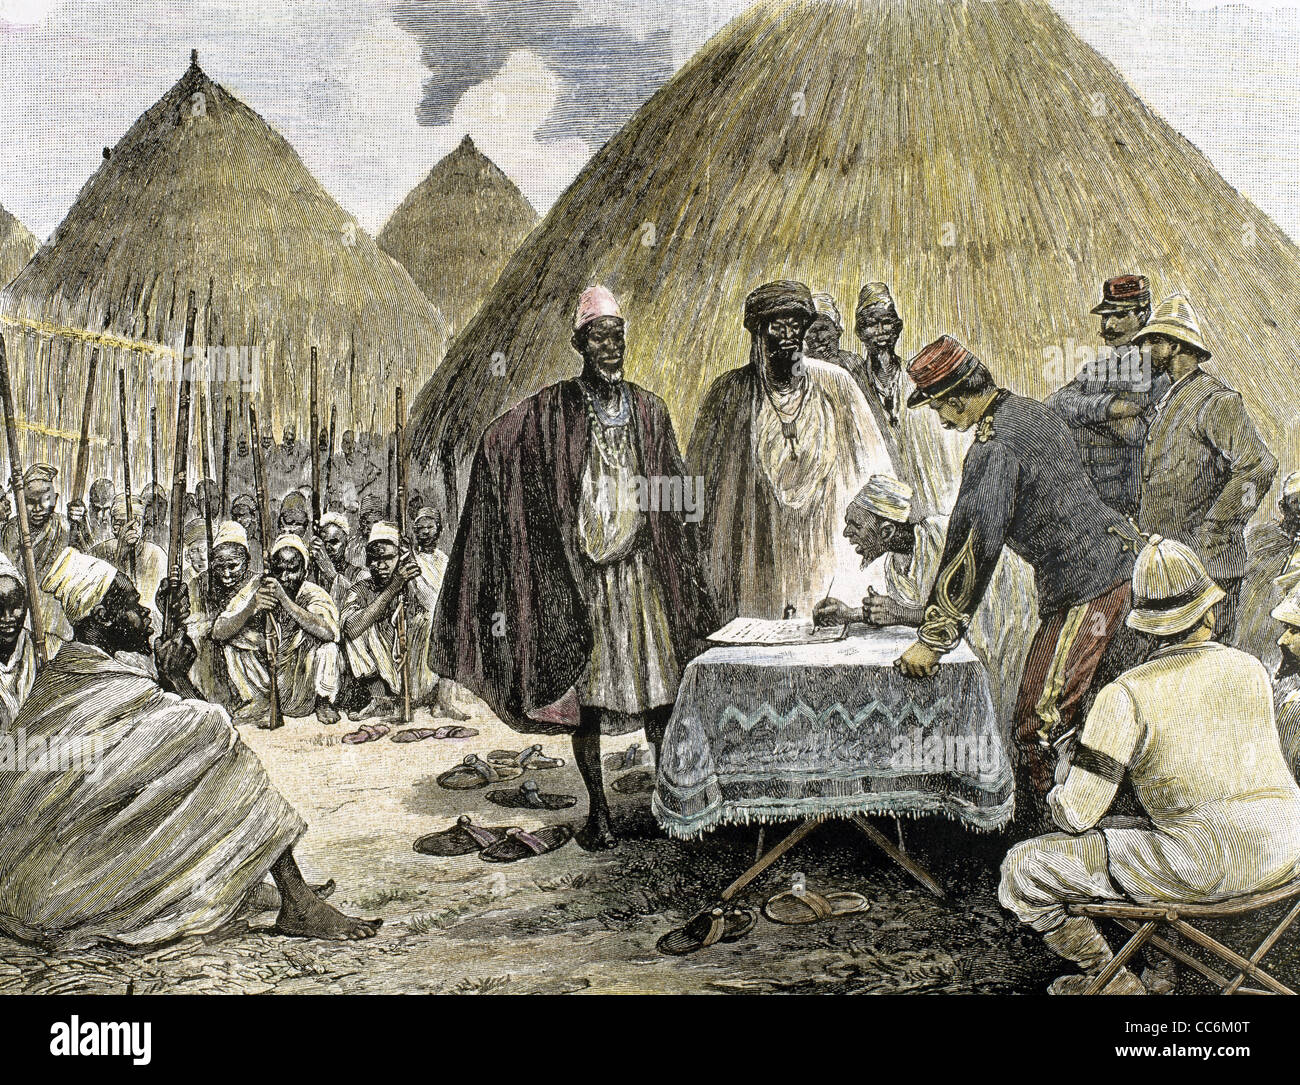 History of Africa. French colonialism. 19th century. Signing a treaty with the chief of the tribe Tamiso. Colored engraving. Stock Photo